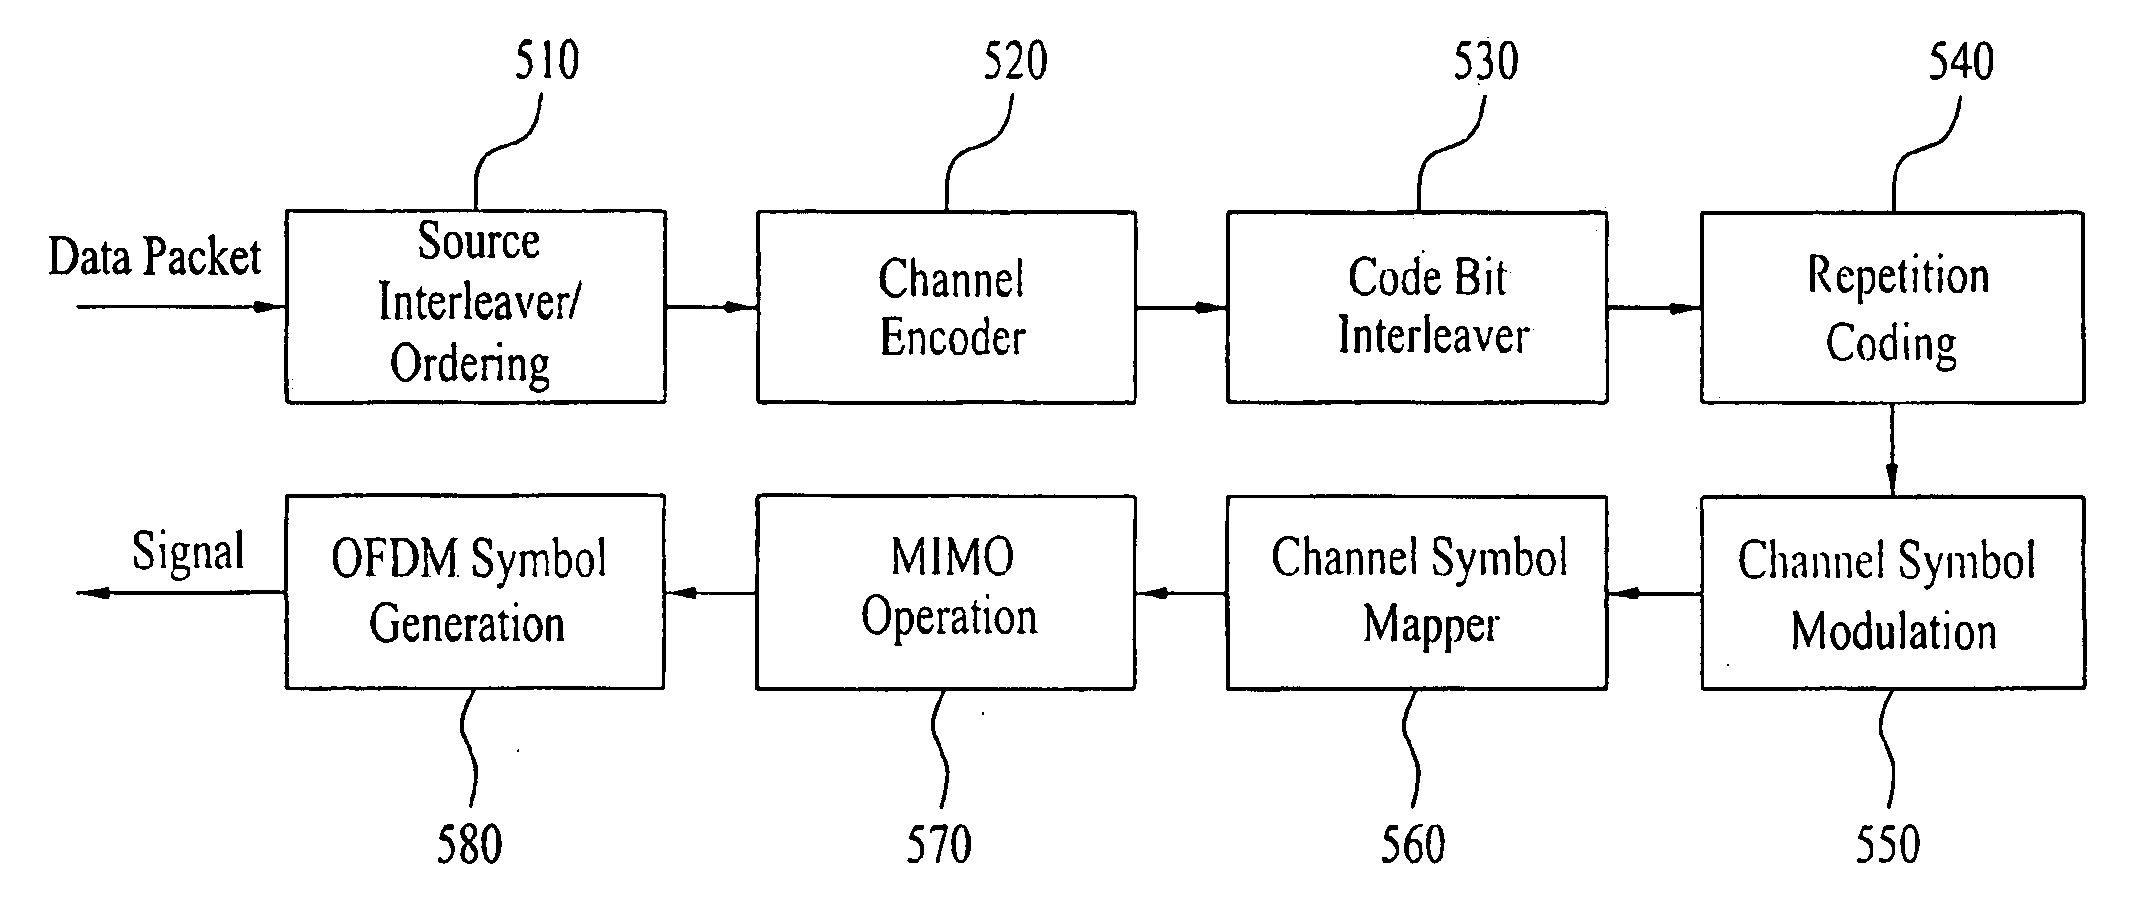 Symbol mapping method for repetition channel coding